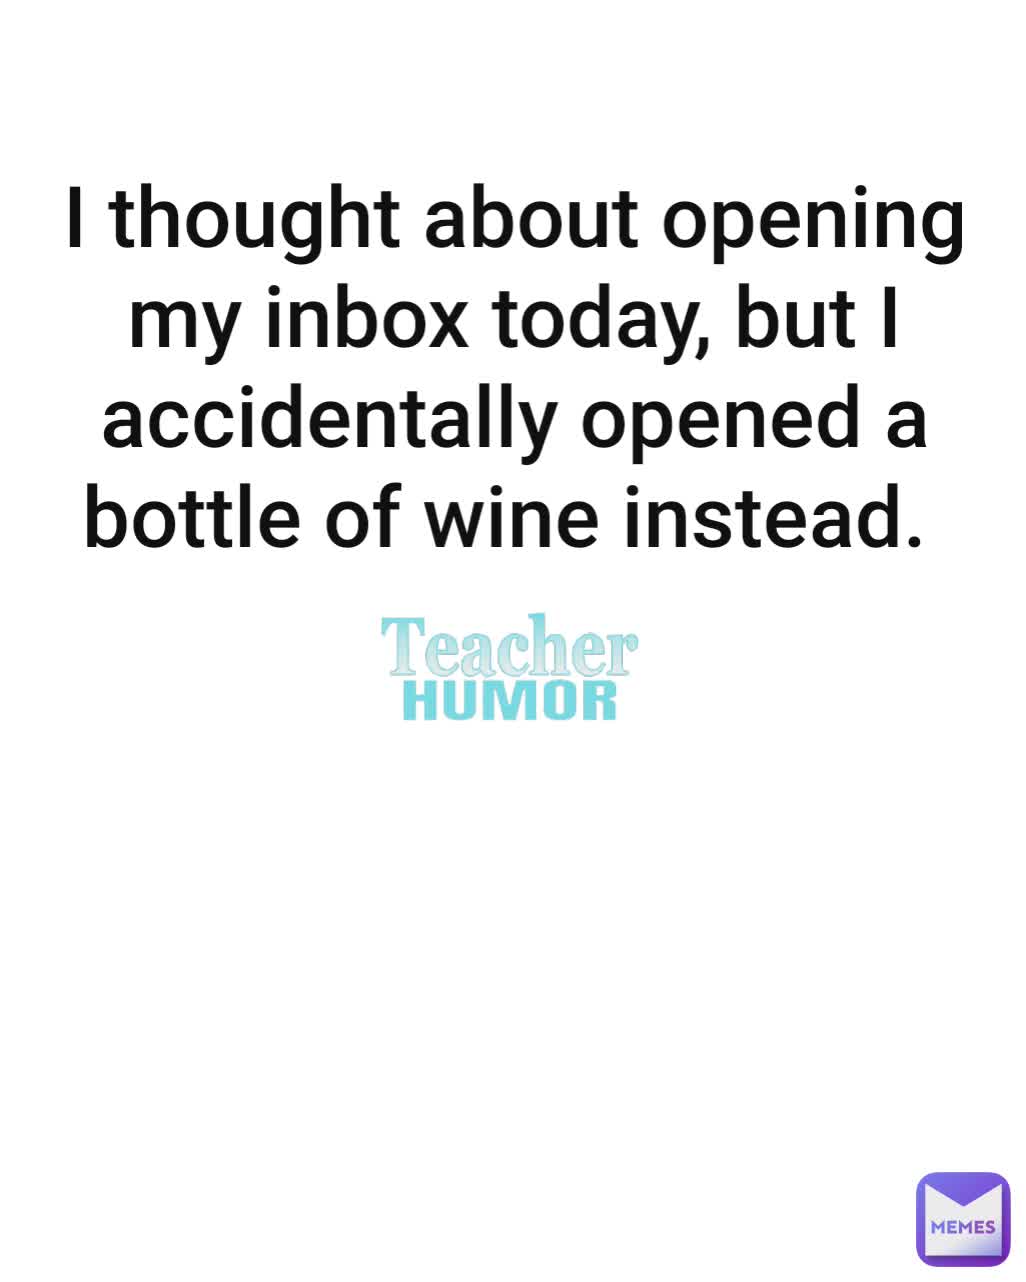 I thought about opening my inbox today, but I accidentally opened a bottle of wine instead. 